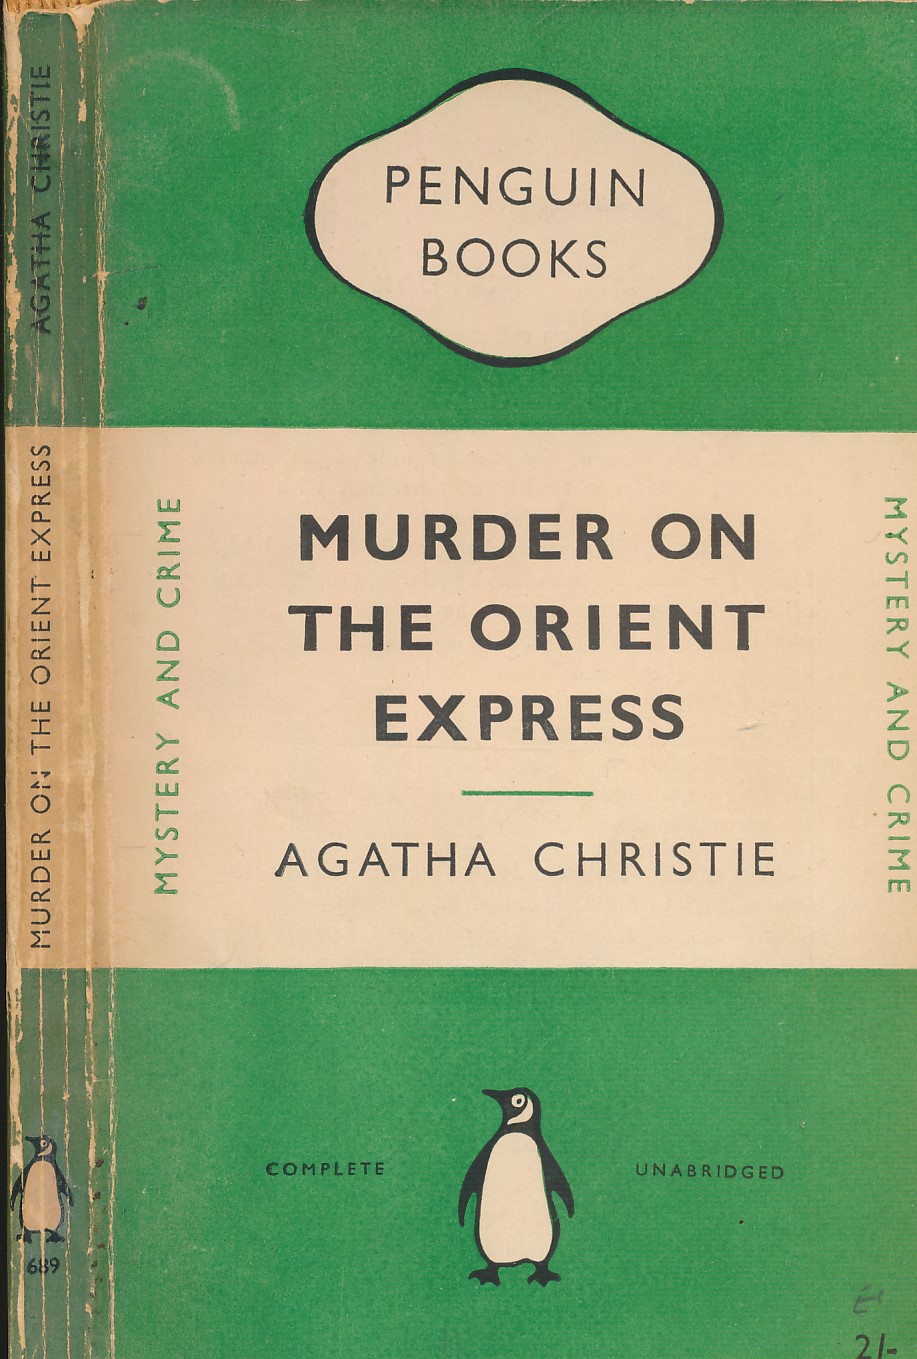 Murder on the Orient Express. Penguin Crime No. 0689